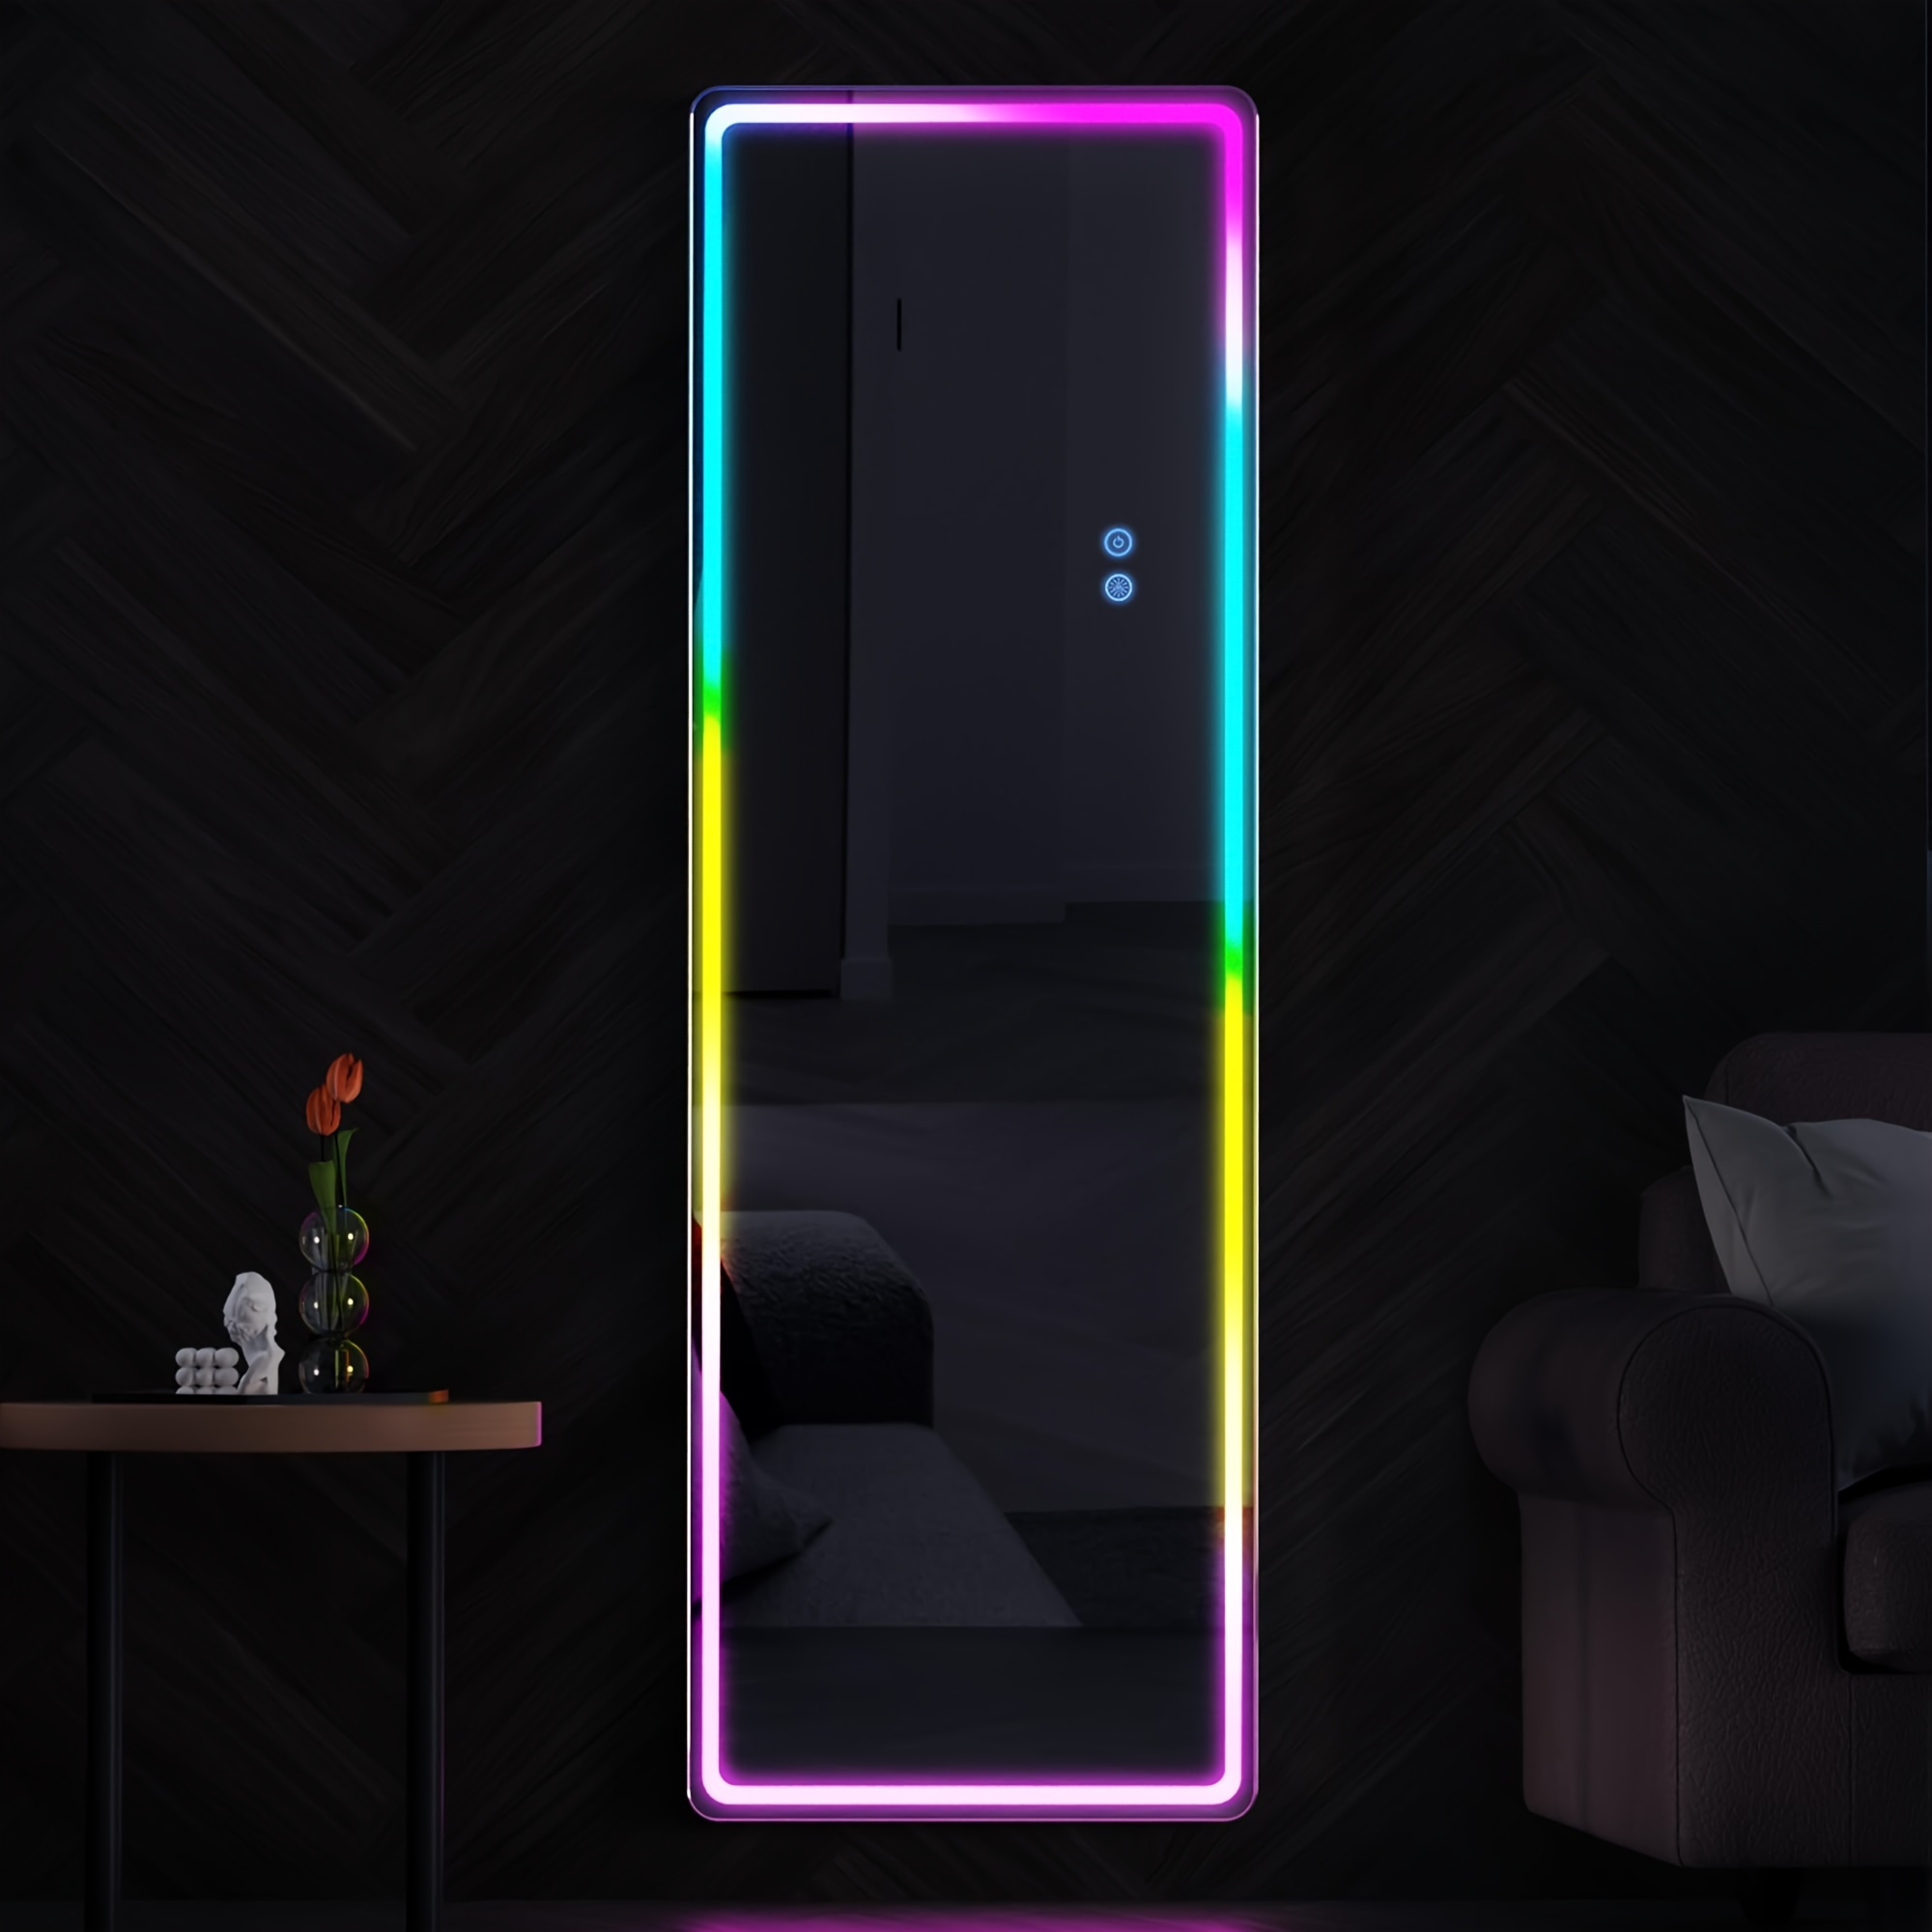 

Rgb Full Length Mirror, Full Body Mirror With Led Lights, Dimming & 7 Color Changing Lighting, Wall Mounted Hanging Mirror With Stand Free Standing Floor Mirror For Bedroom